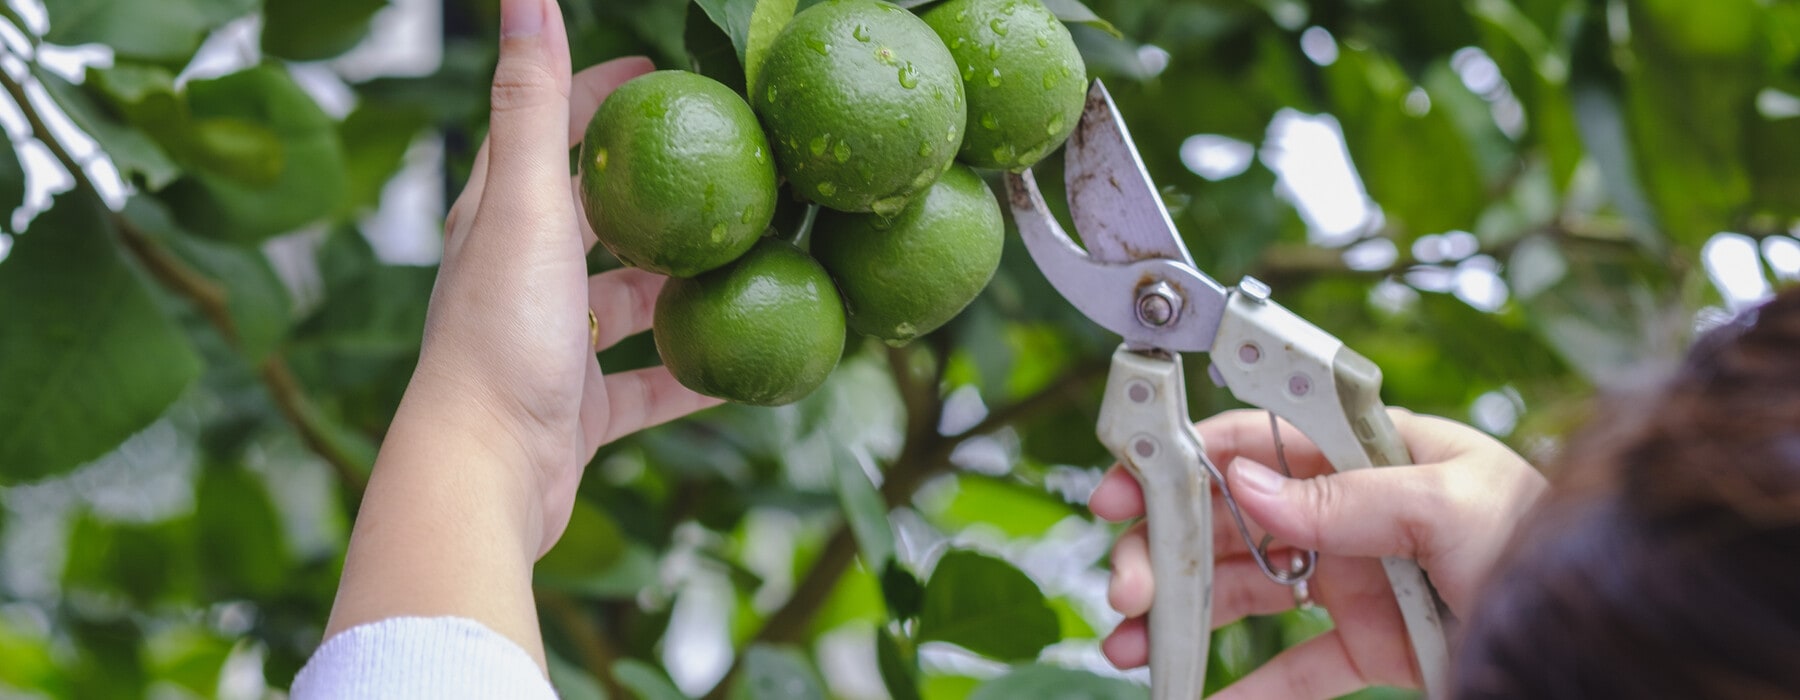 Cropped Hand Of Woman Harvest Green Lime By Pruning Shears